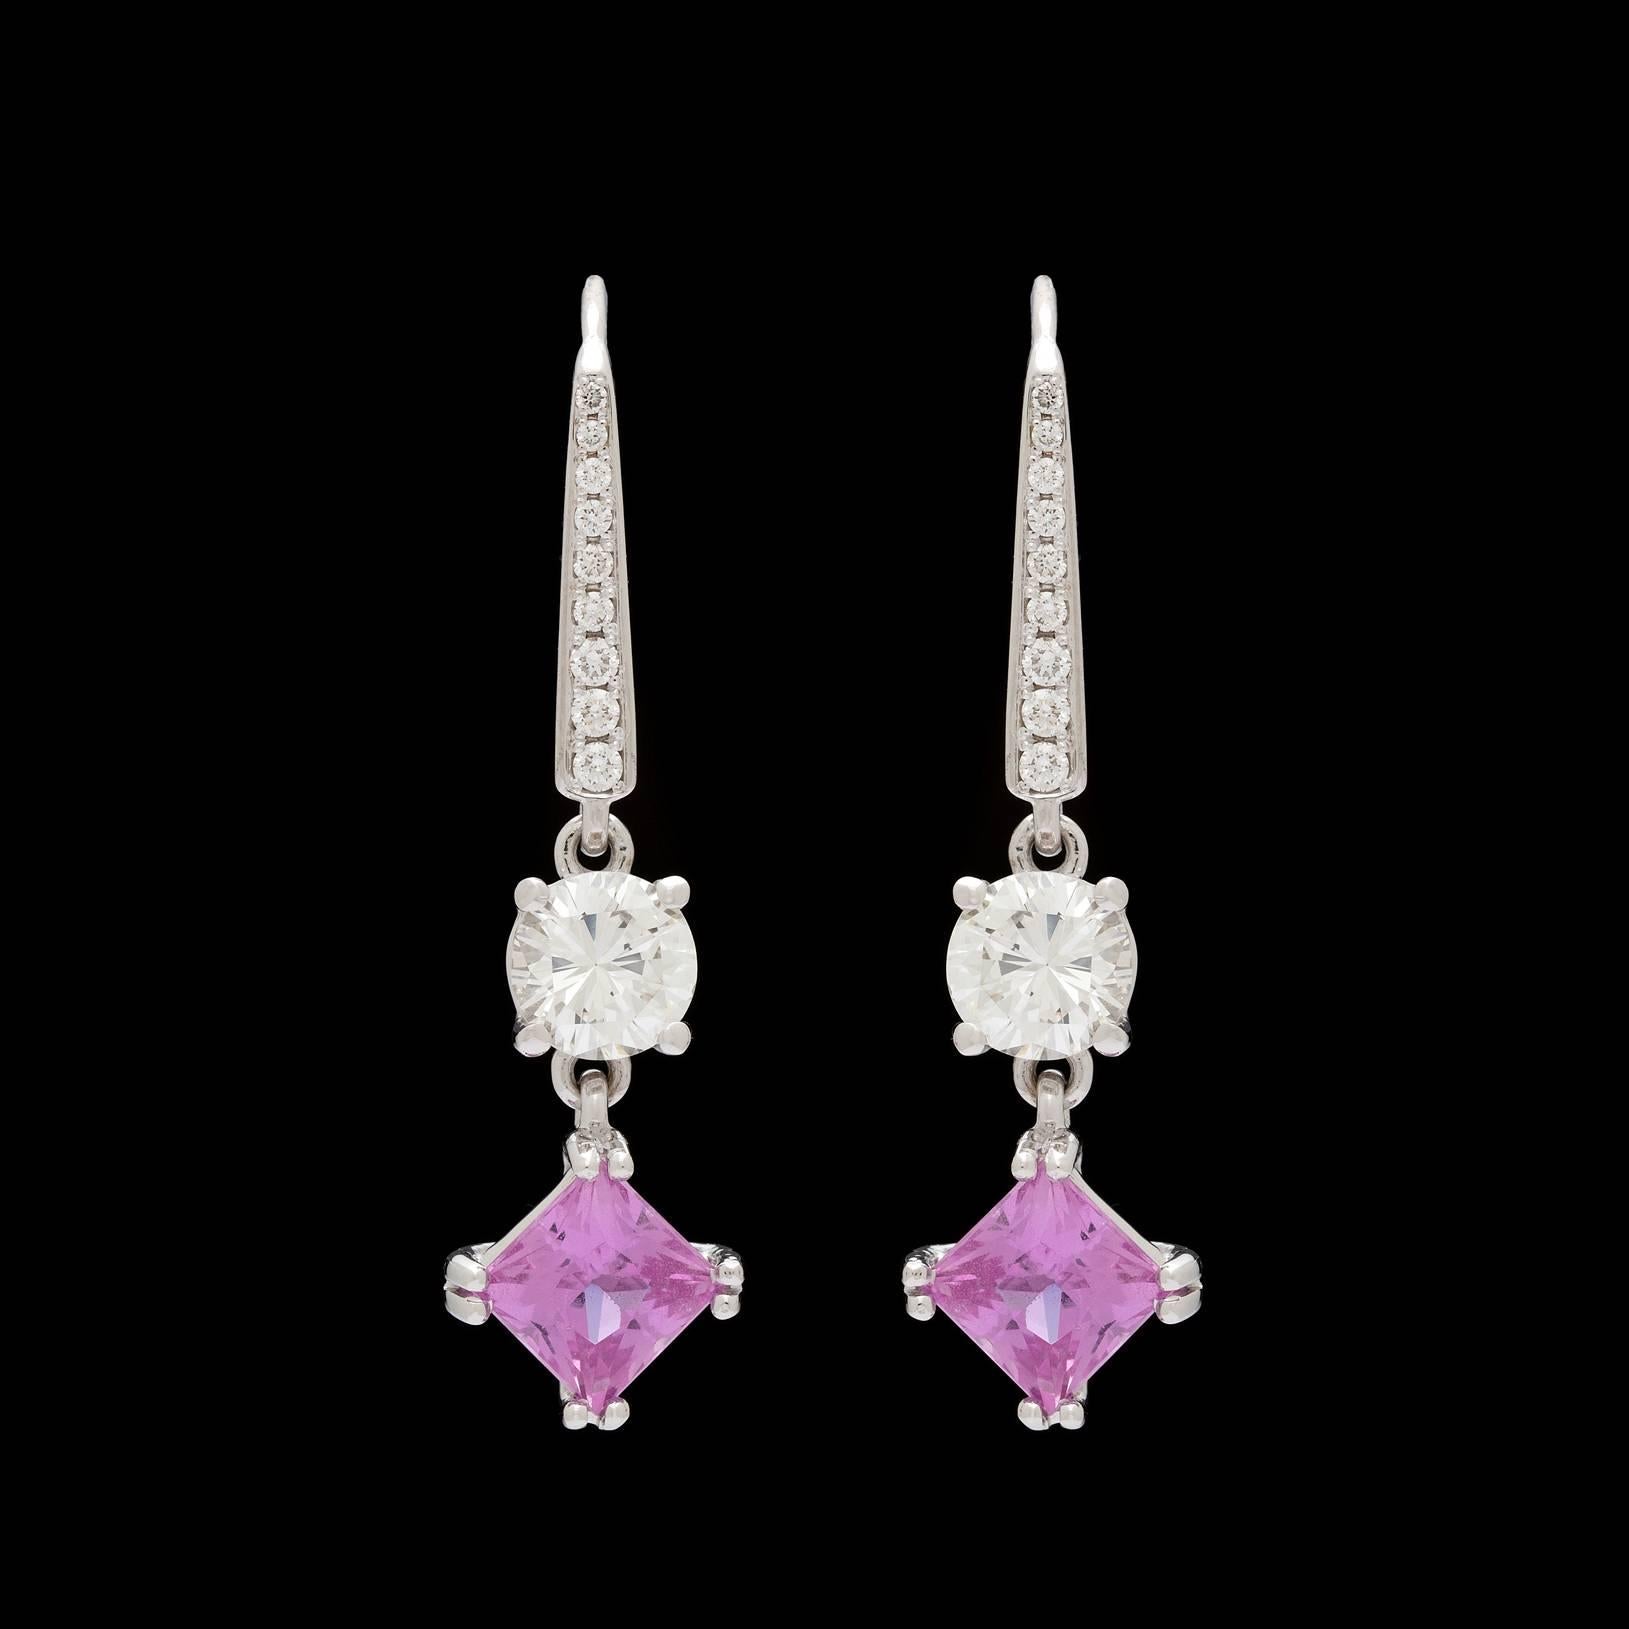 18k white gold drop earrings features a 1.16 carat square modified brilliant cut purplish pink sapphire each detailed with a single round brilliant cut diamond totaling 1.25 carats and accented with 18 round full cut melee diamonds totaling 0.15